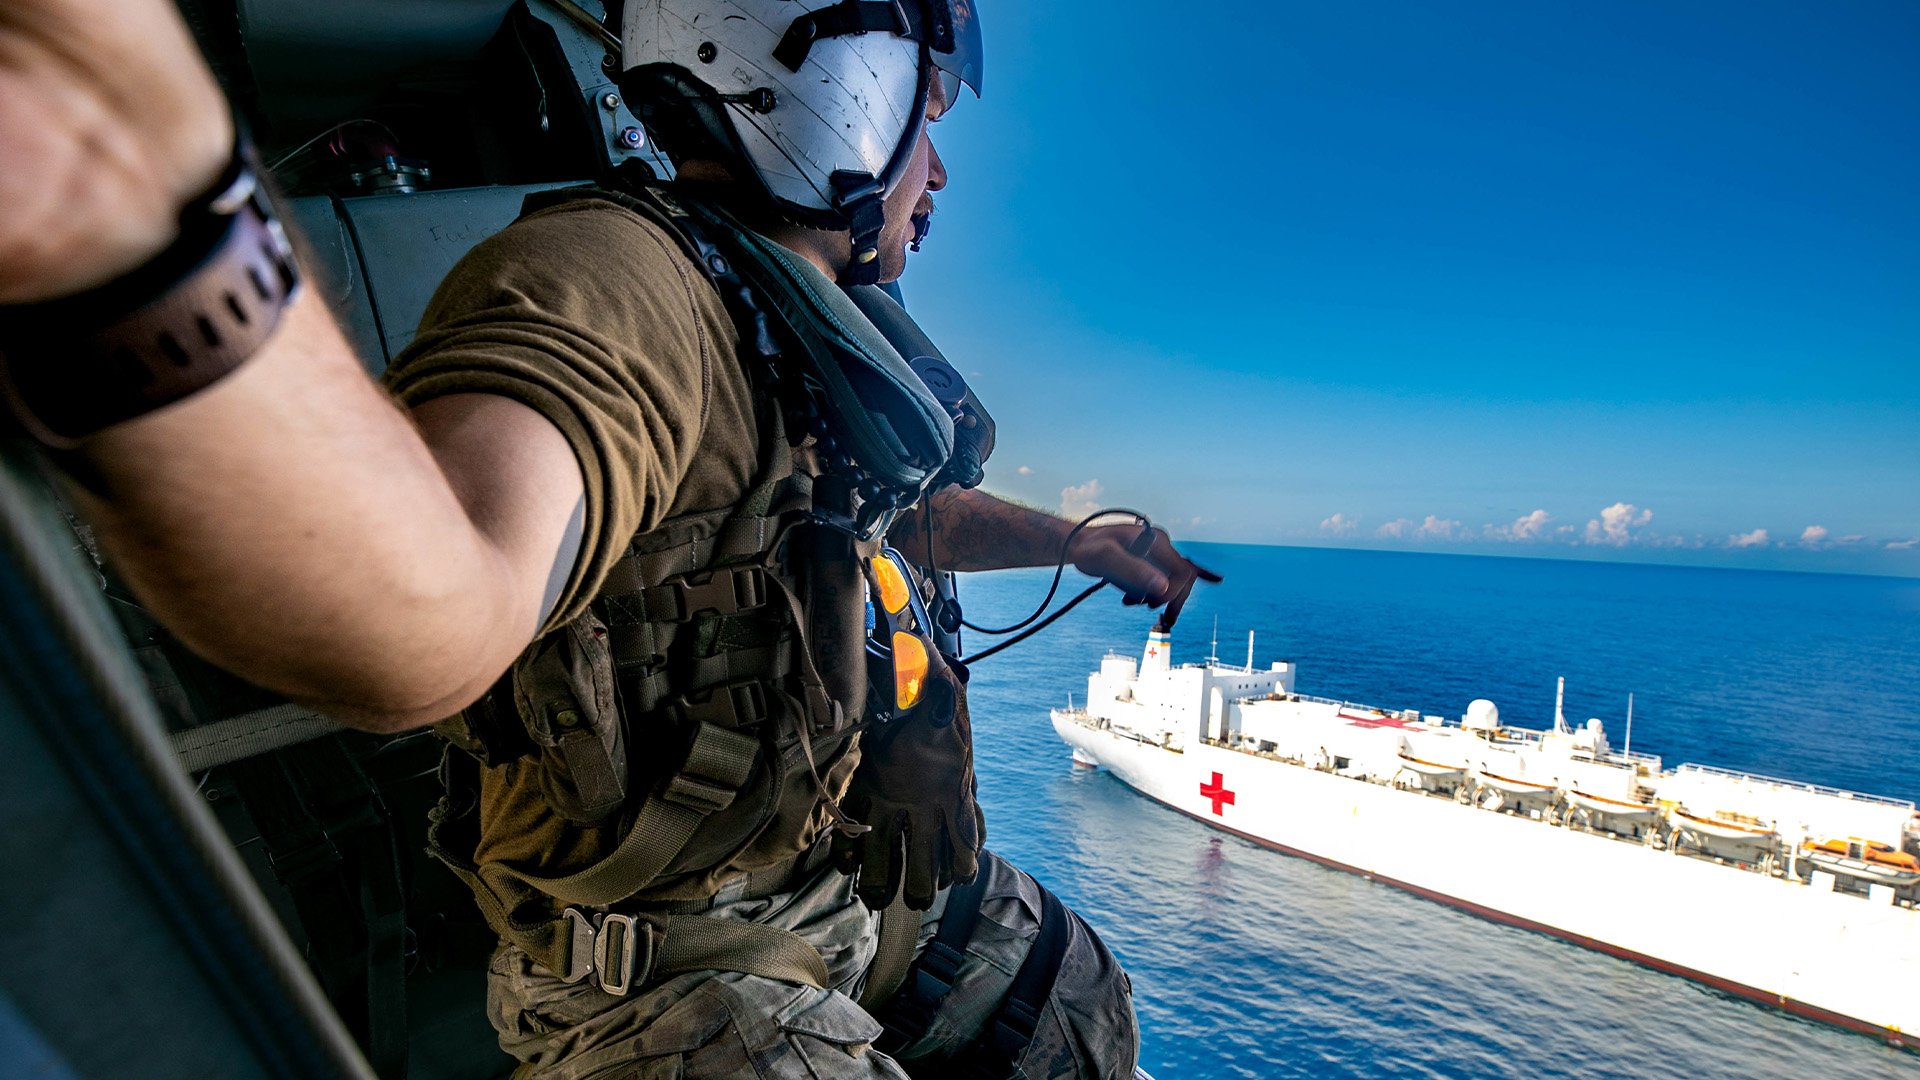 Naval Aircrewman (Helicopter) 2nd Class Bryce Batiancela, from the "Chargers" of Helicopter Sea Combat Squadron 26 Detachment 3 , monitors his aircraft's distance from the hospital ship Comfort off Haiti on Dec. 12, 2022. US avy photo by Mass Communication Specialist 2nd Class Juel Foster.